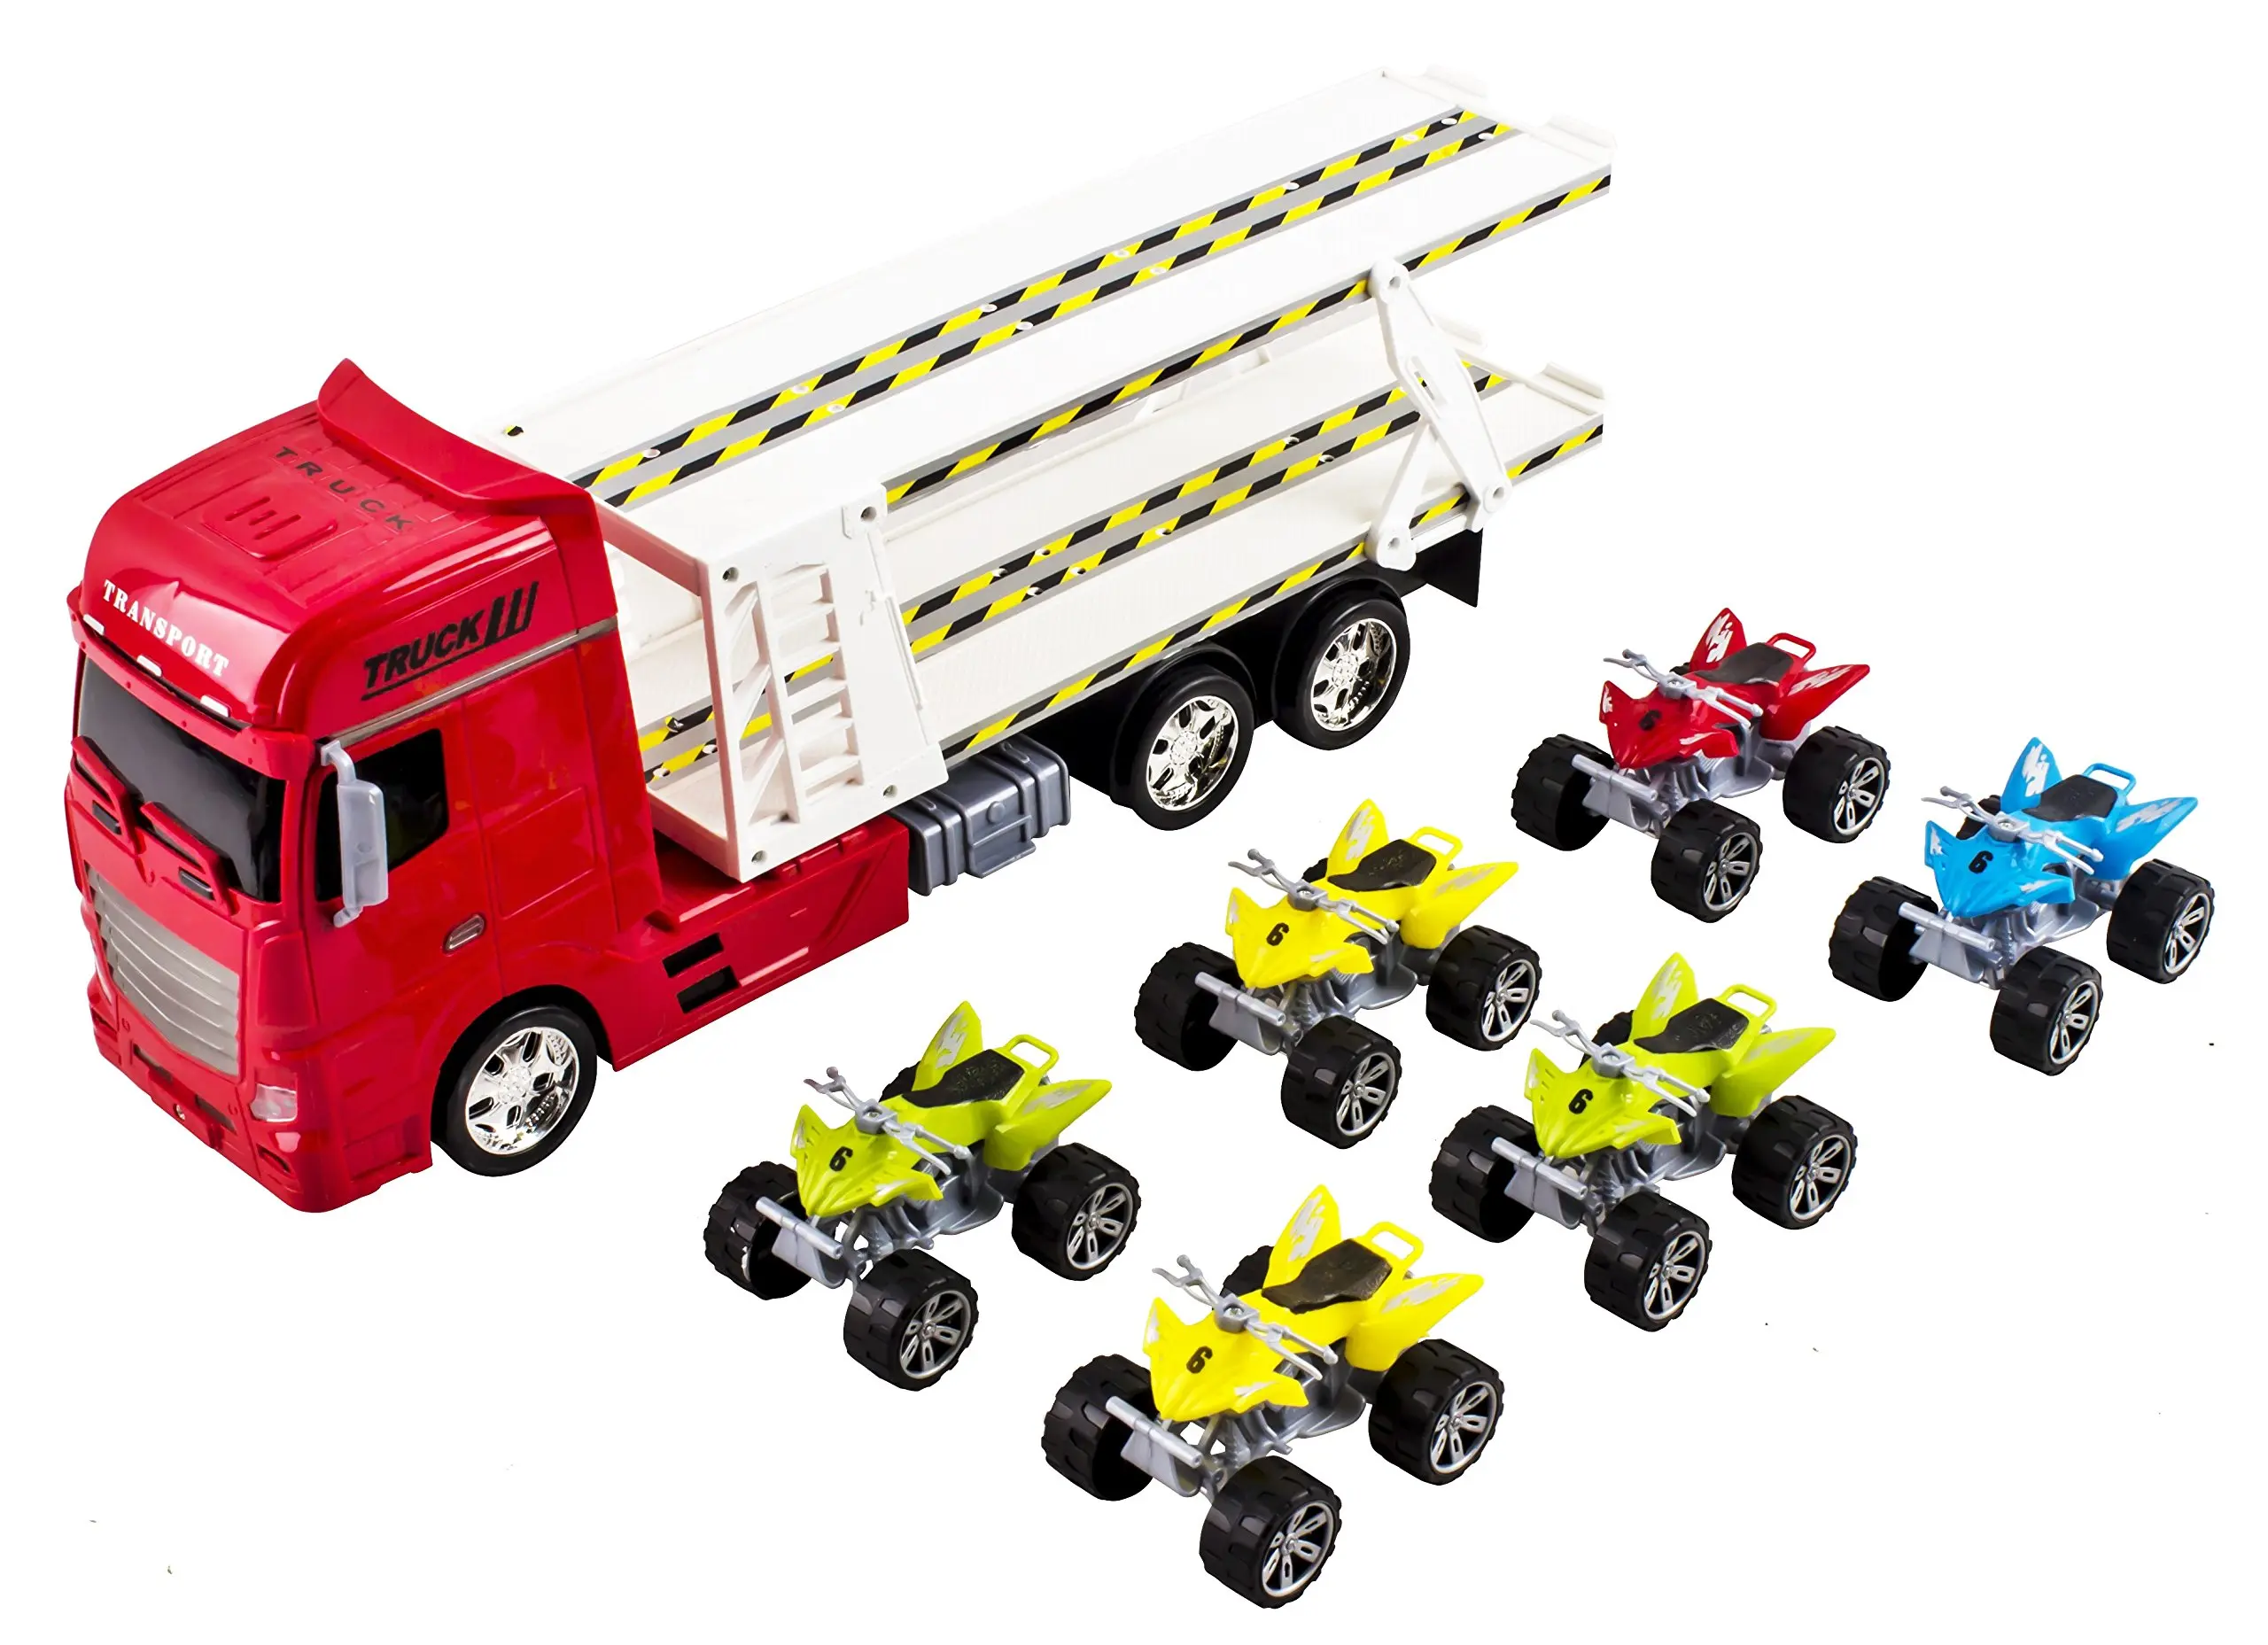 Toy Truck Transporter Trailer Semi Truck 14.5 Childrens Friction Toy Truck w// 4 Toy ATVs Blue Truck No Batteries Required